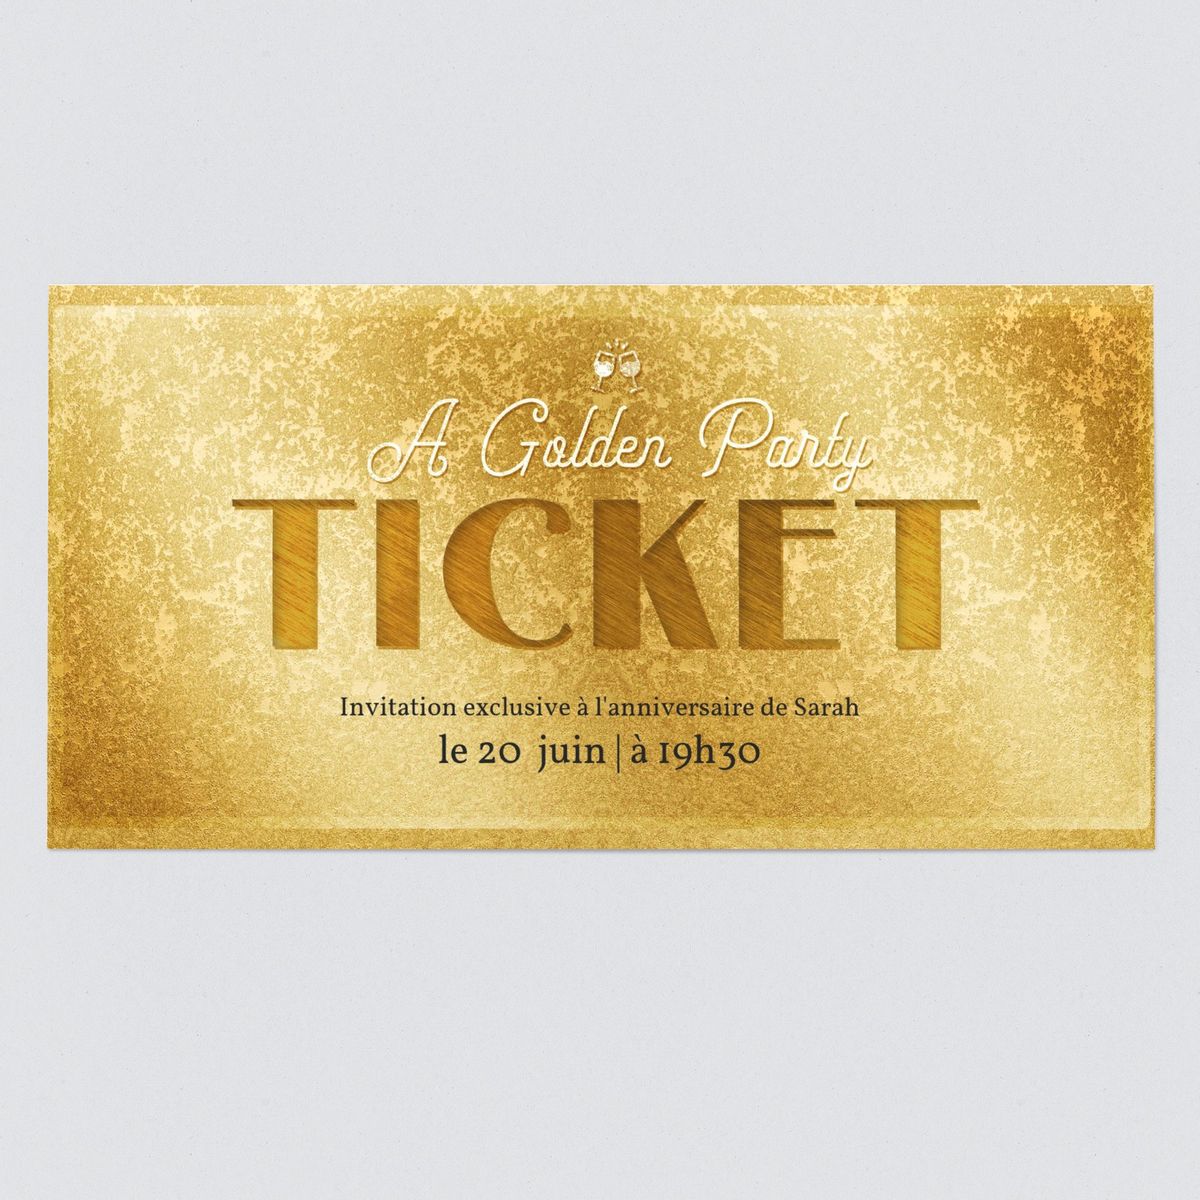 Ticket d'or